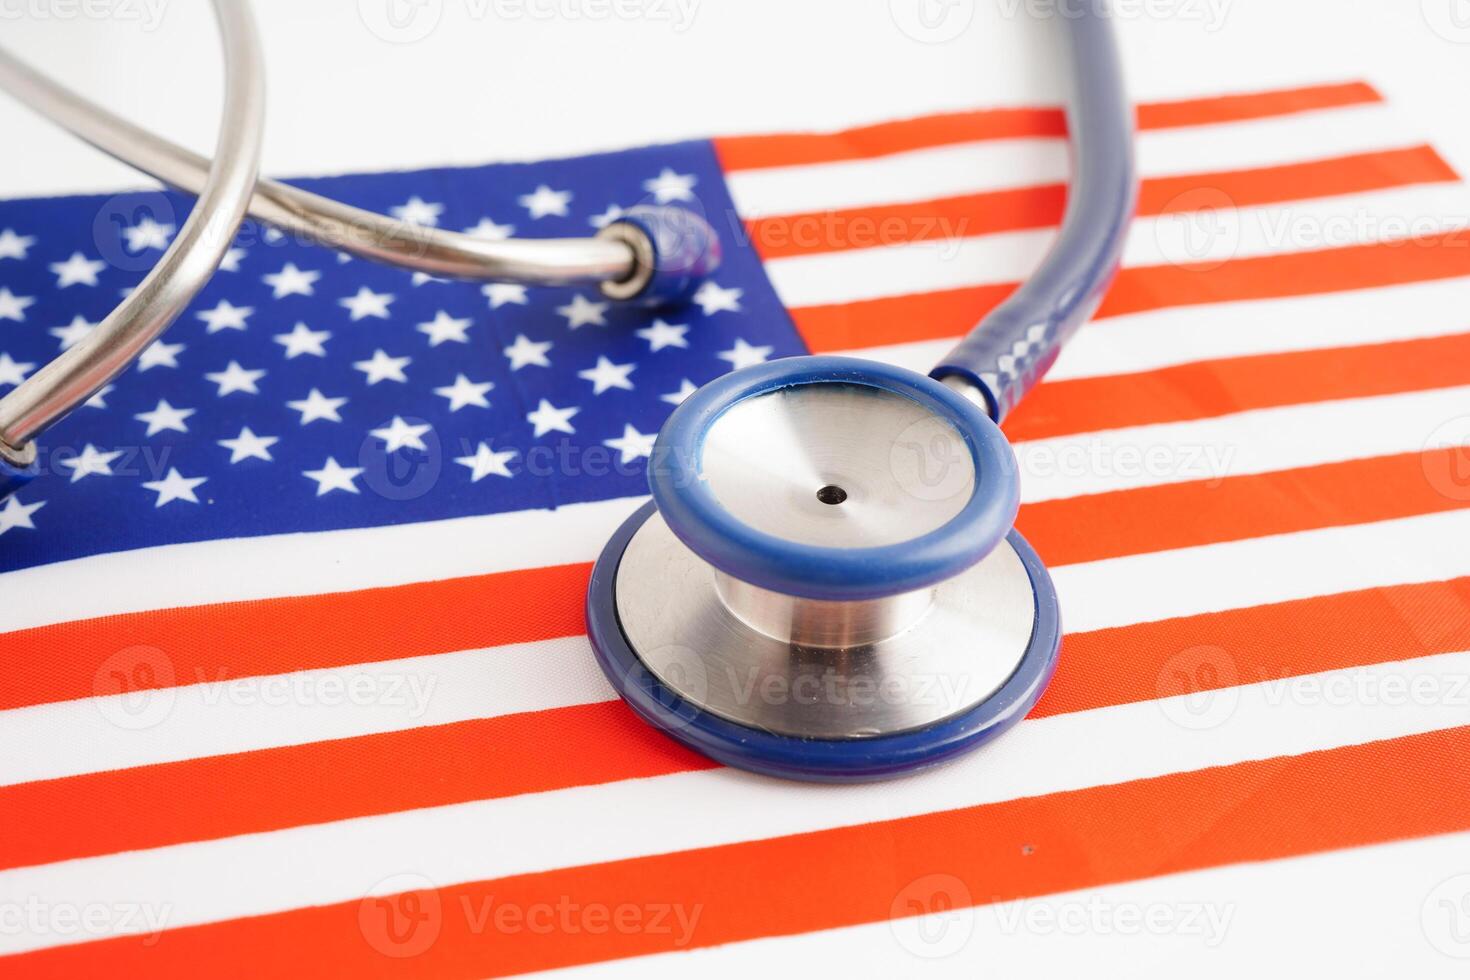 America flag with black stethoscope, Business and finance concept. photo